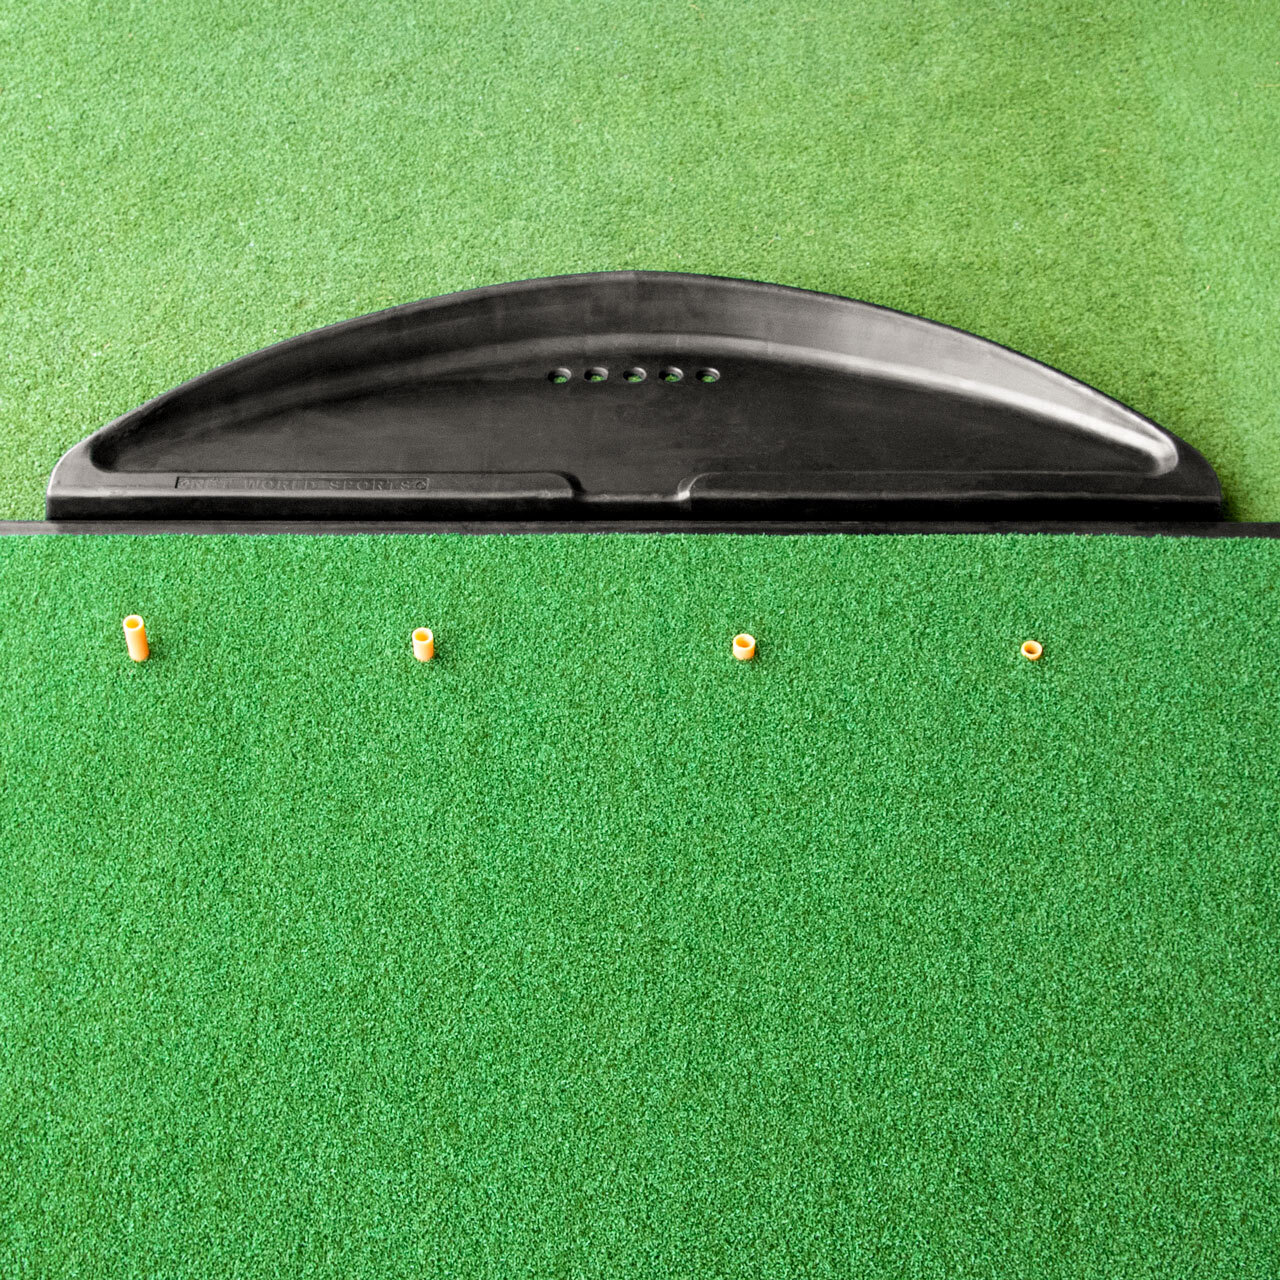 FORB RUBBER GOLF BALL TRAY HOLDER